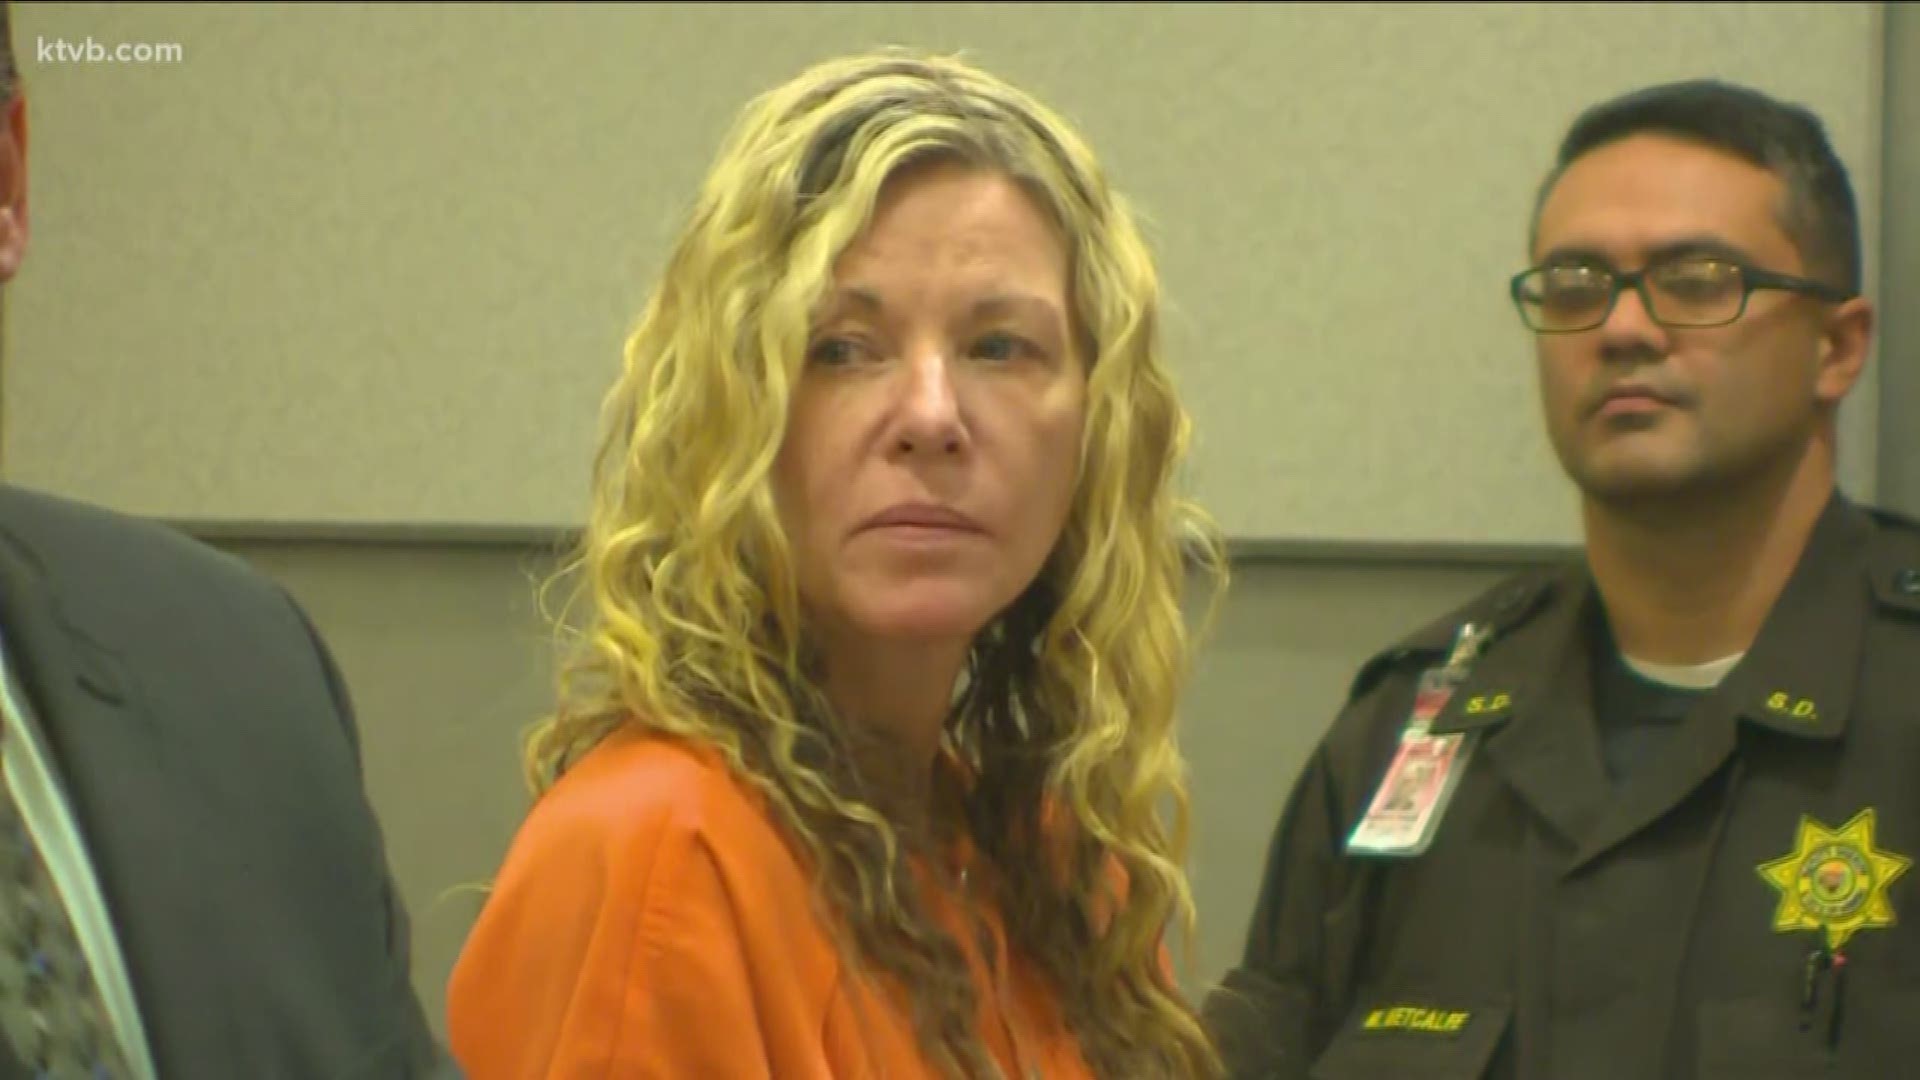 A judge on Wednesday denied Vallow's request to reduce her $5 million bond.